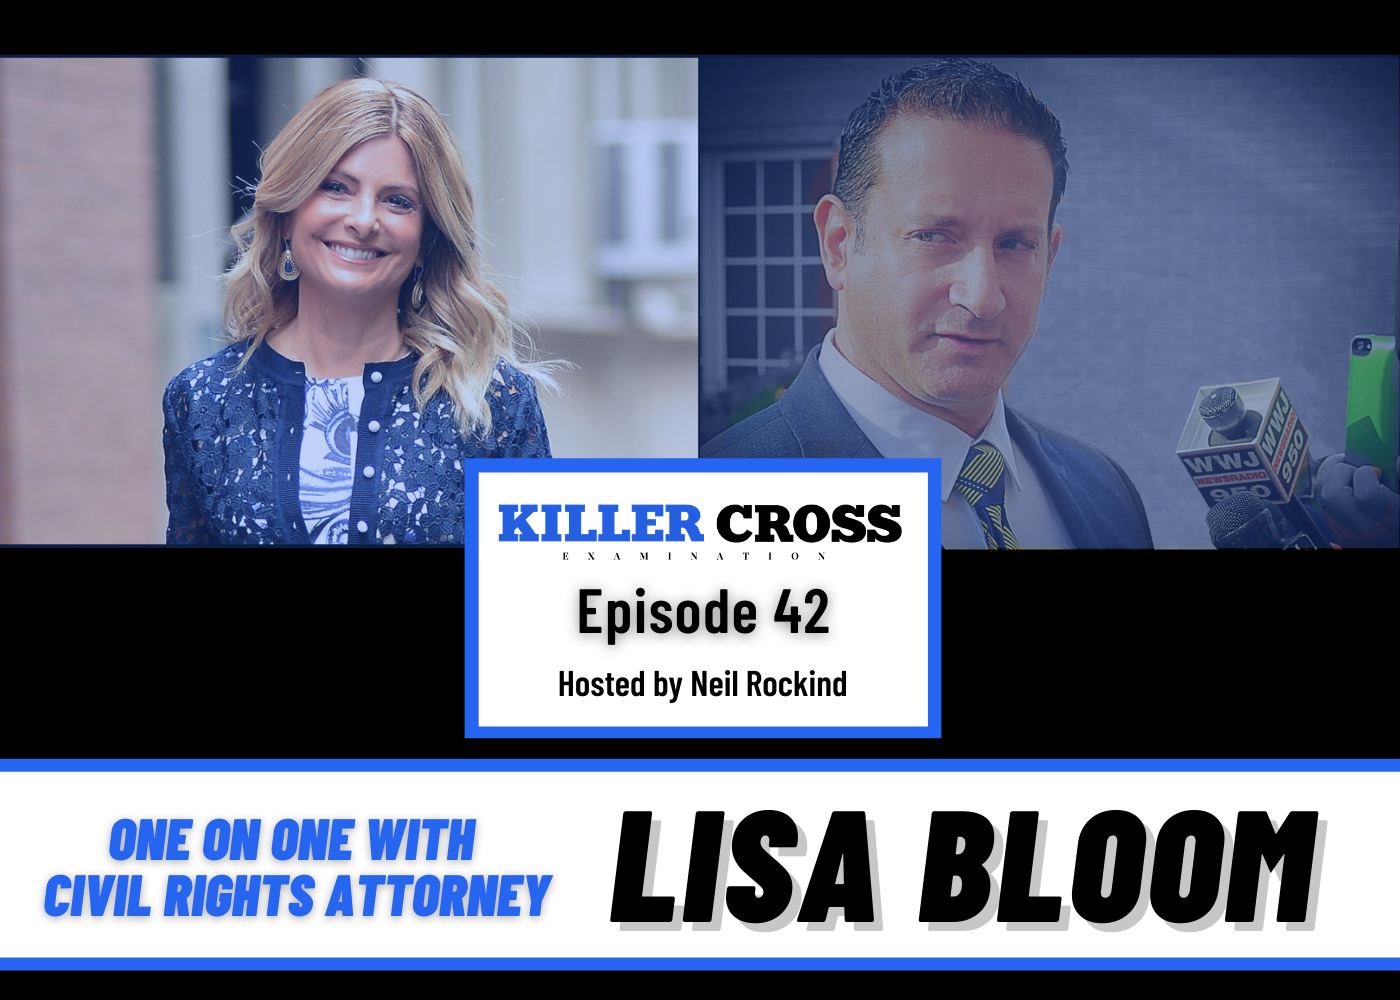 Episode 42: One on One with Civil Rights Attorney- Lisa Bloom